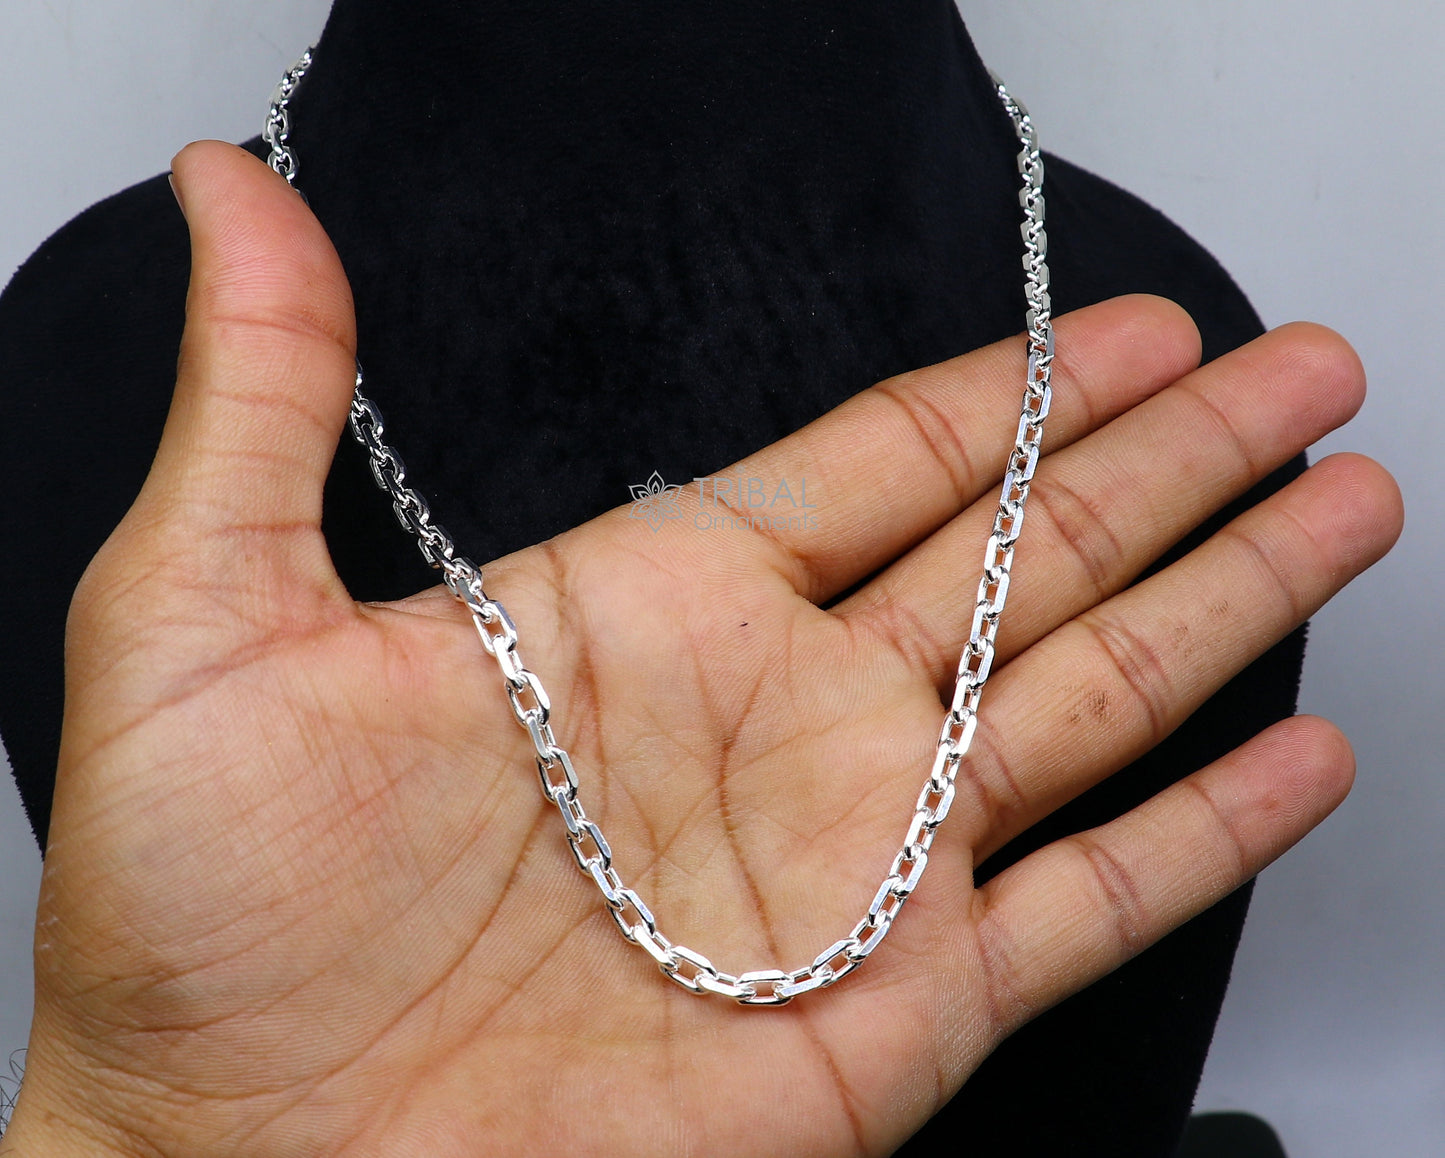 20" 5mm 925 Sterling silver handmade fabulous vintage look Rolo chain unisex gifting necklace jewelry from india ch231 - TRIBAL ORNAMENTS